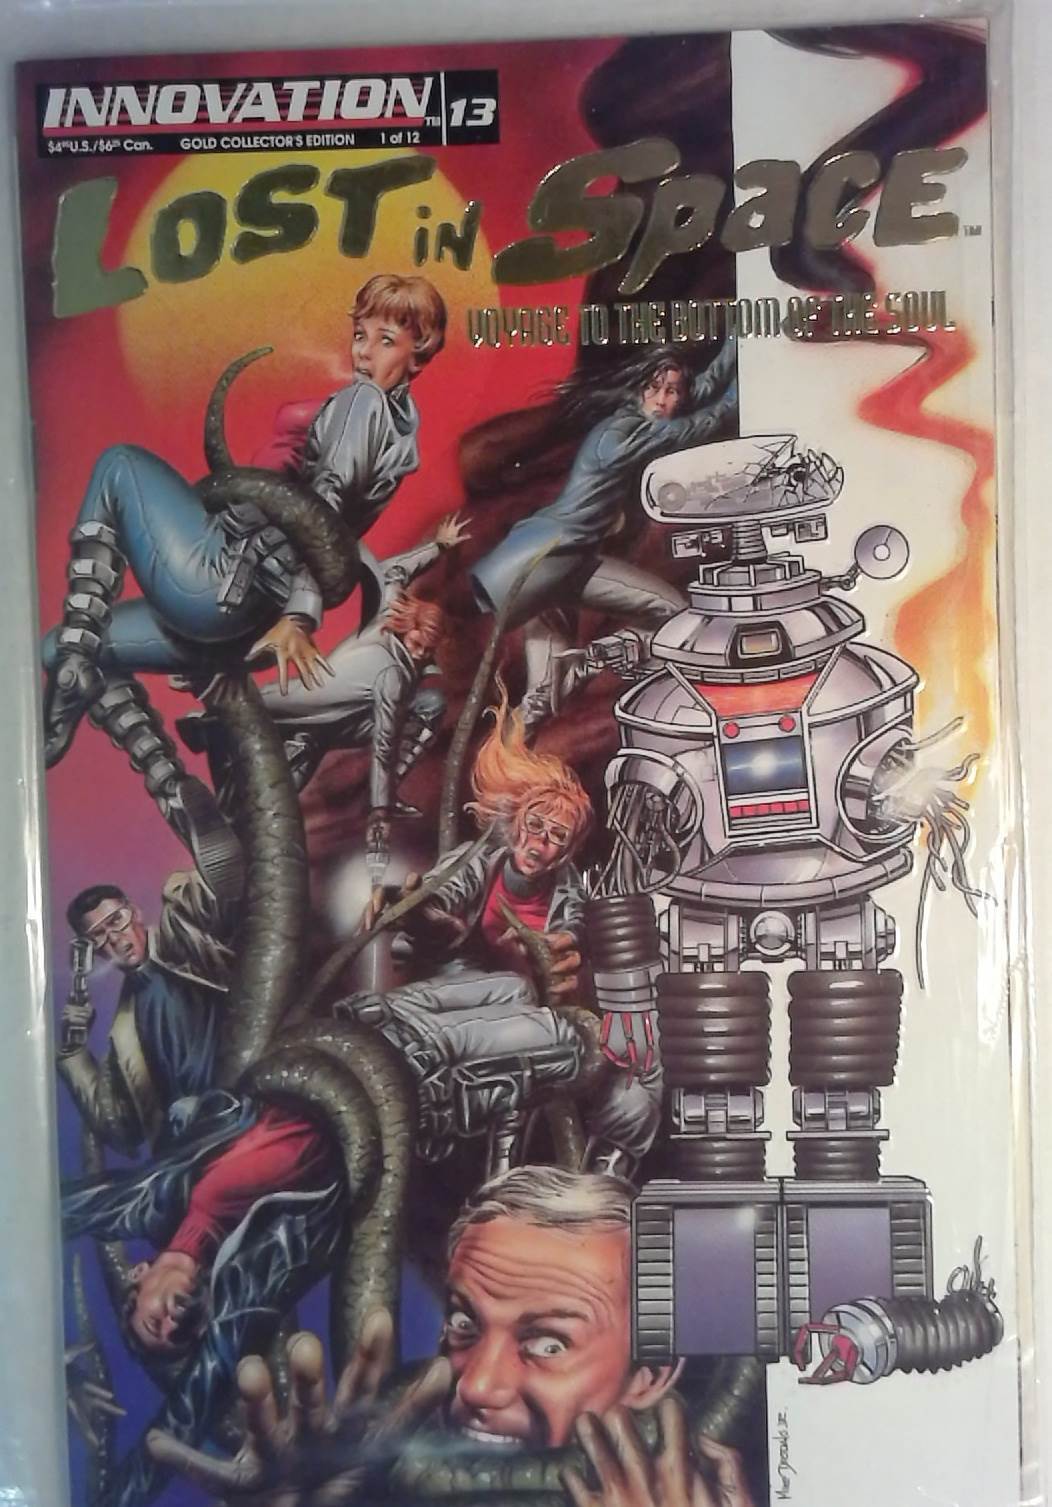 Lost in Space #13 Innovation (1993) Gold Title Edition Comic Book